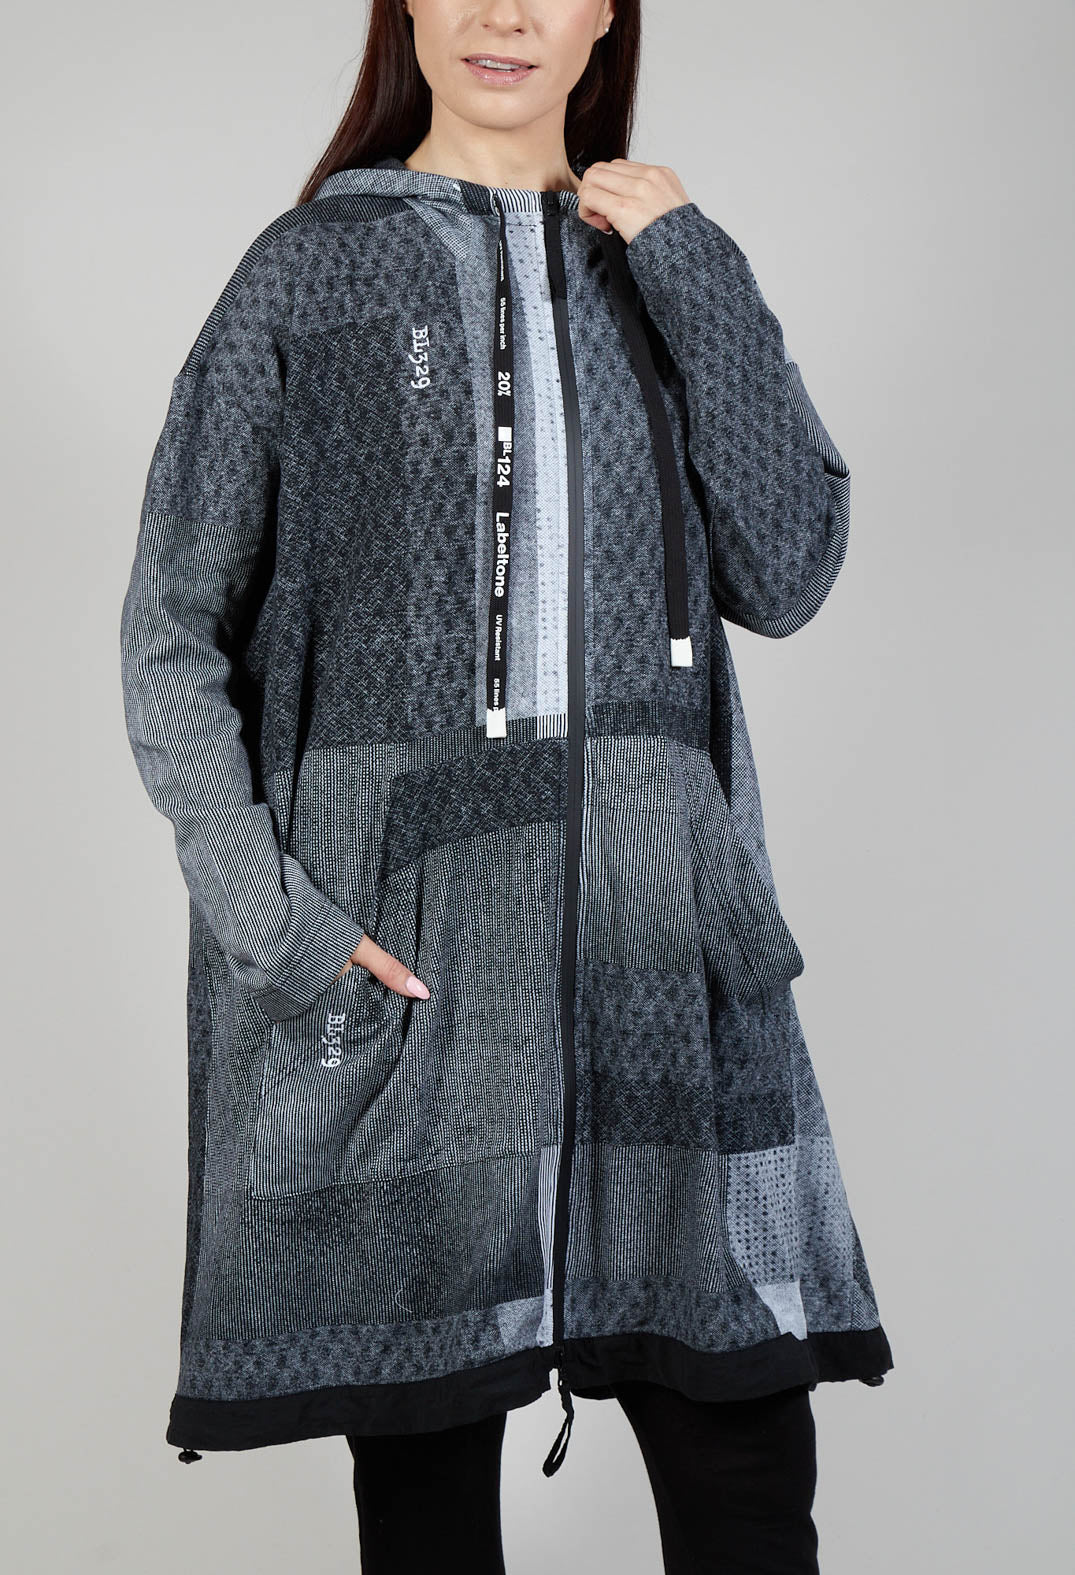 Relaxed Fit Hooded Coat in Black Print